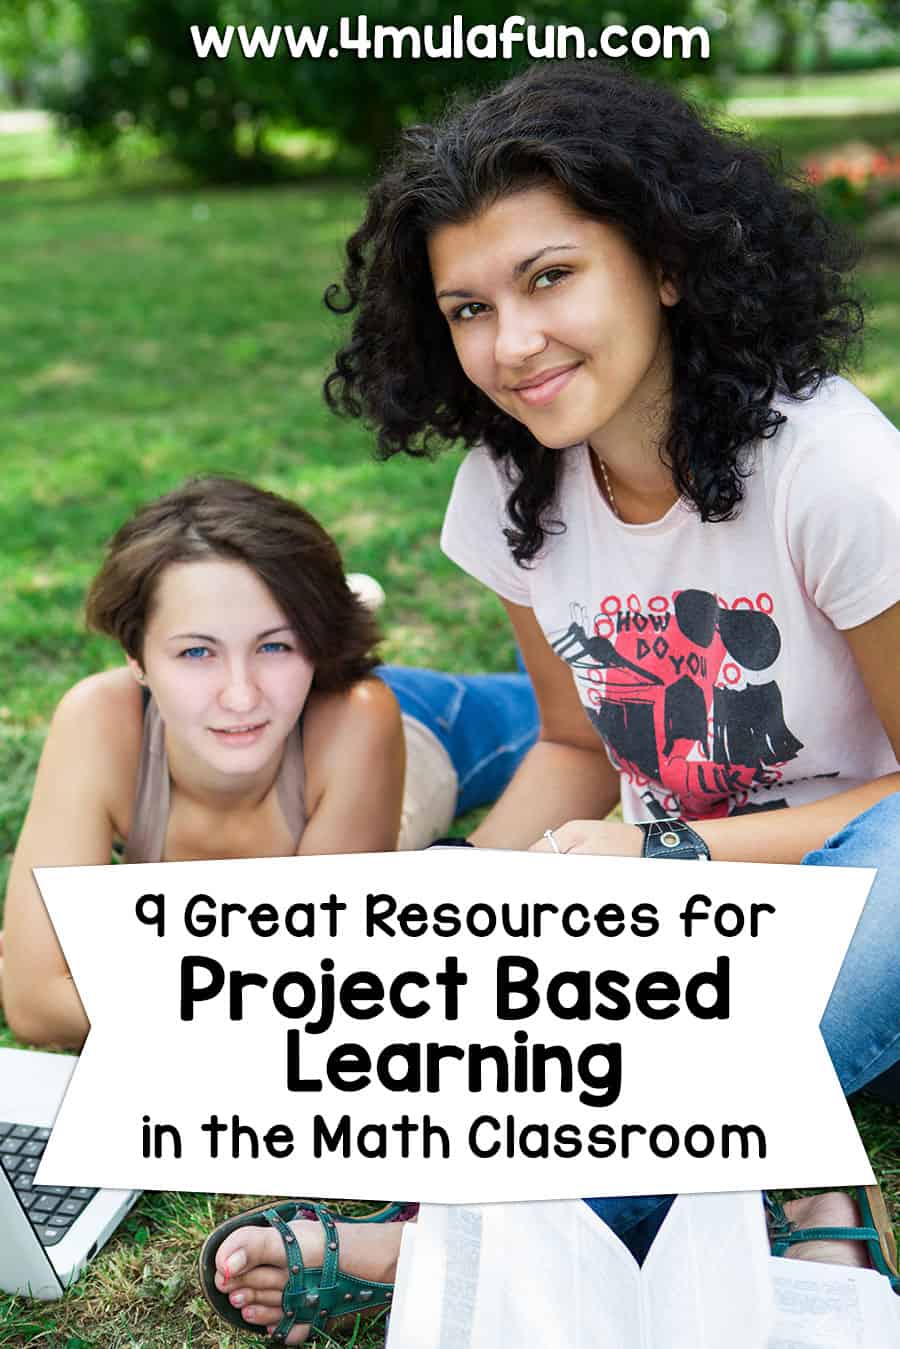 Throughout the school year teachers all over (just like you) are looking for ways to incorporate multiple skills into a lesson while actively engaging their students. With Project Based Learning in the math classroom you can do just that. Not sure what PBL is or how to implement it? Read this to learn all about it, plus where to find nine great resources to implement it in your own classroom!